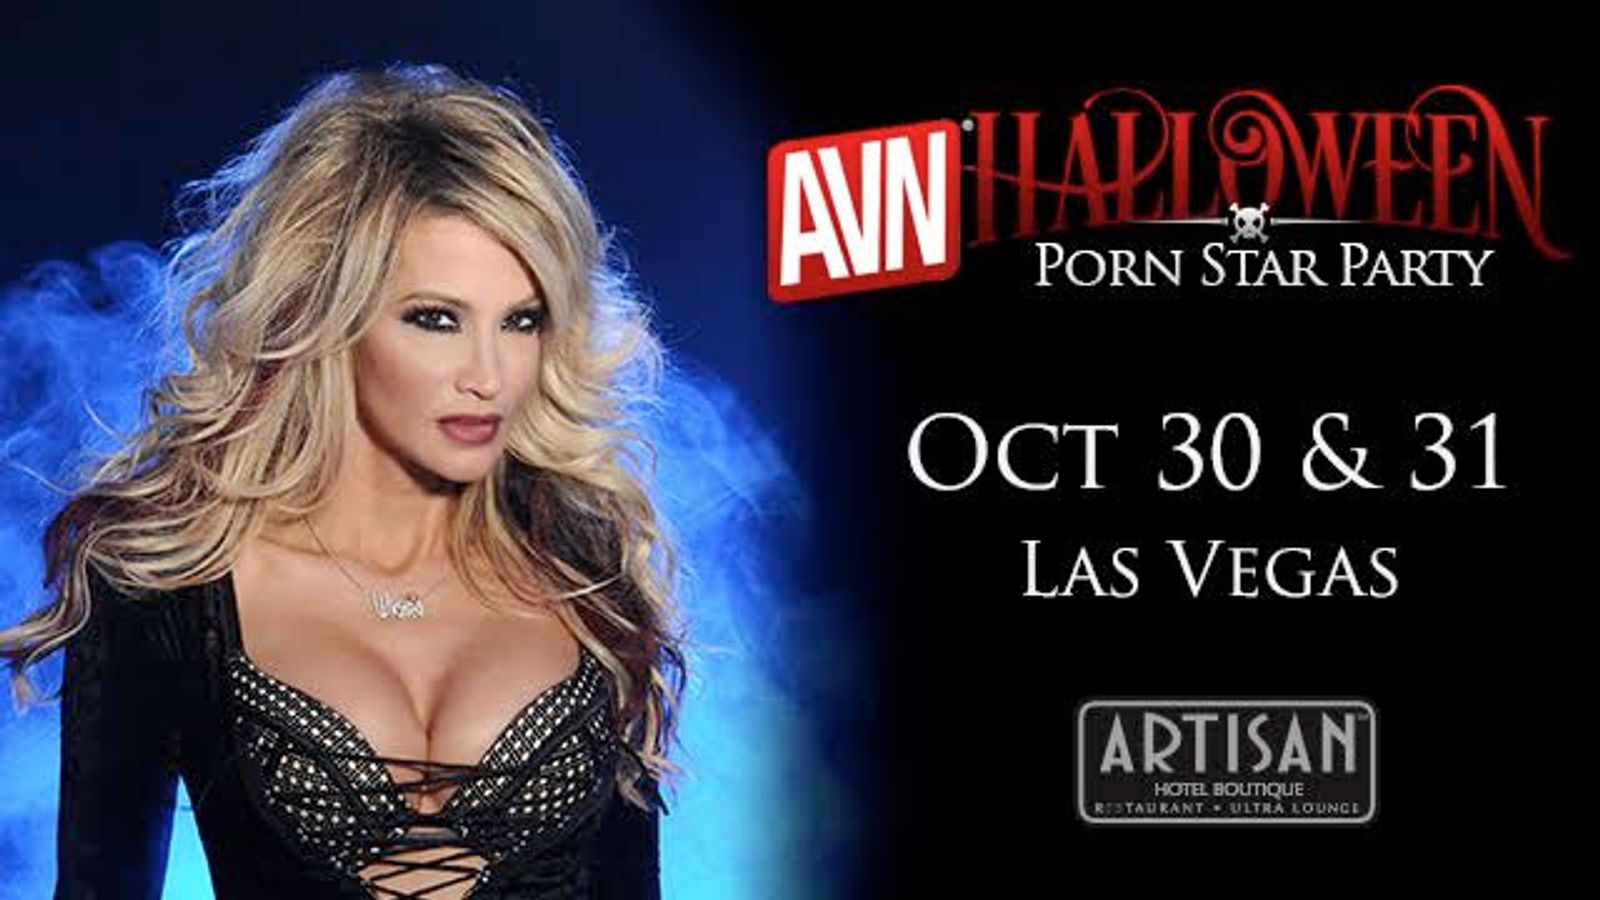 jessica drake to Host VIP Area at AVN Halloween Porn Star Party